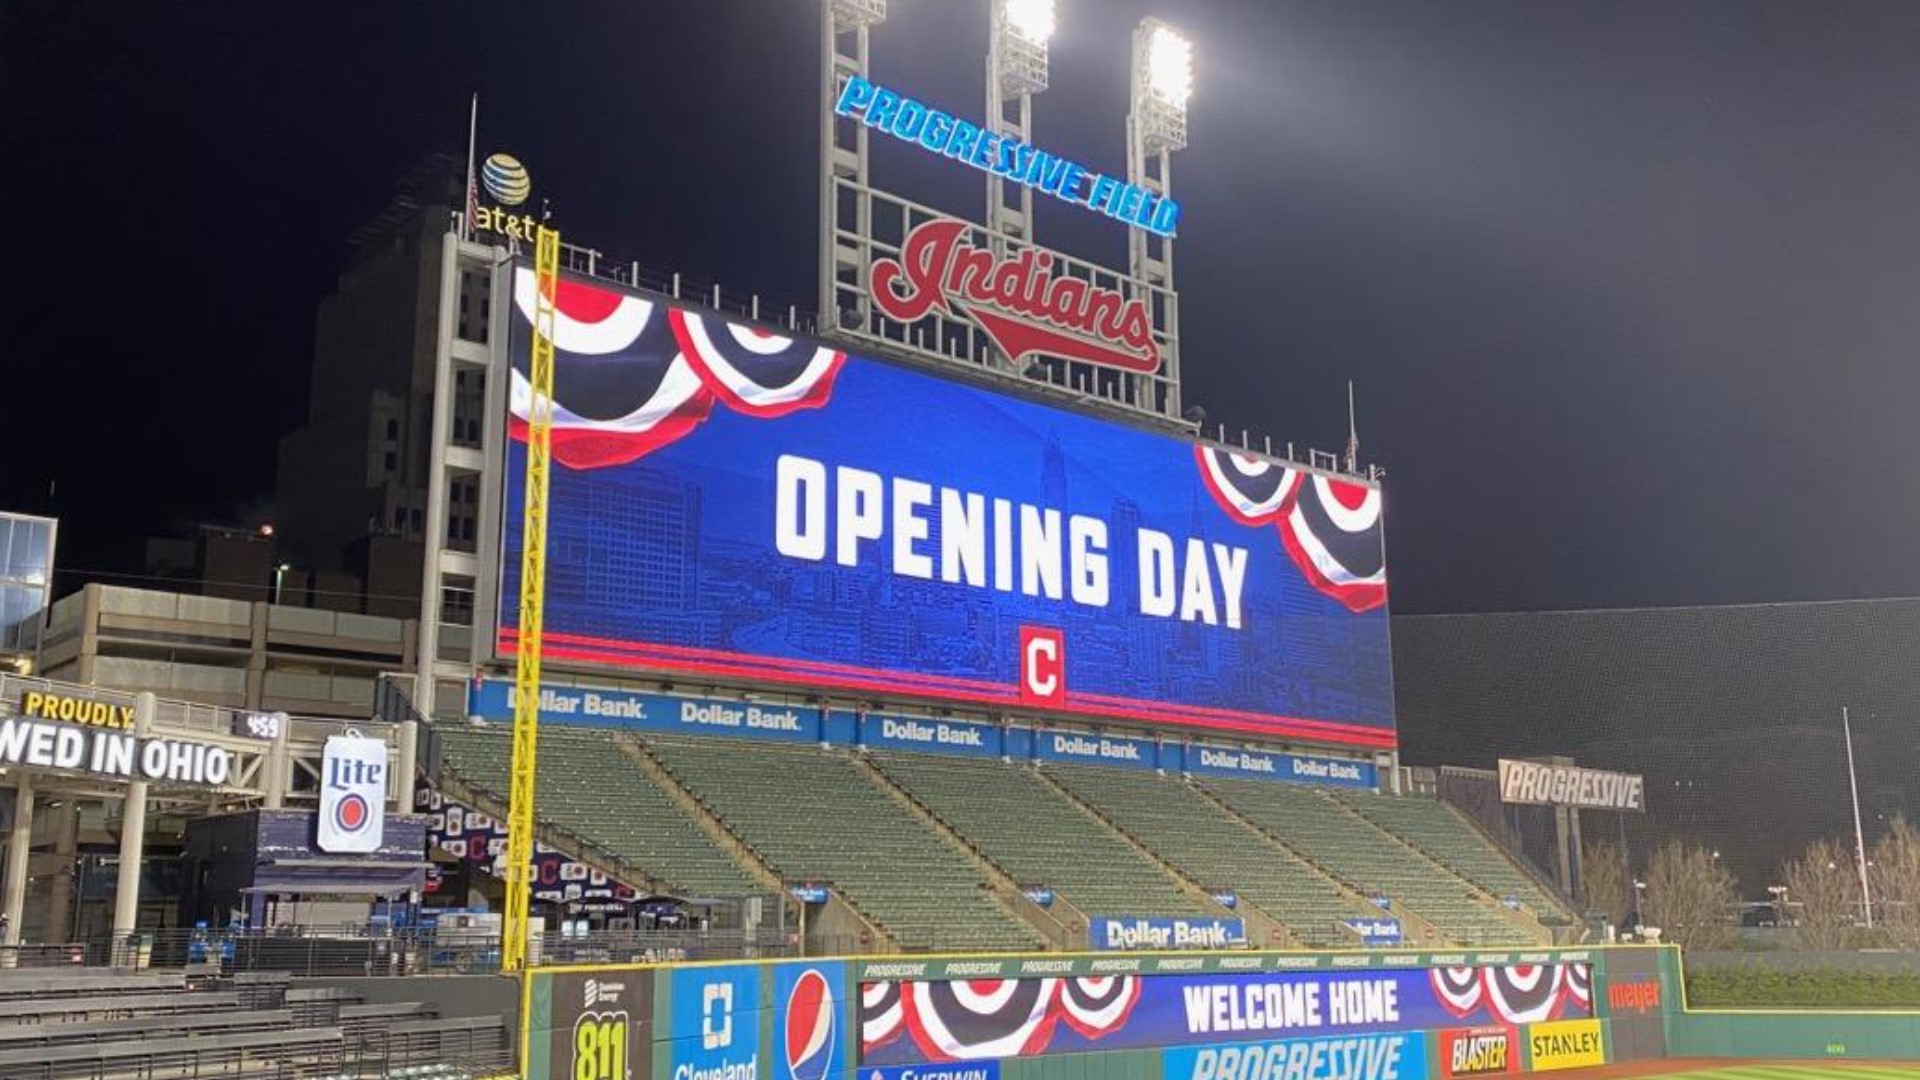 There are many new changes you can expect at Progressive Field this year from COVID-19 precautions to all-mobile ticketing.